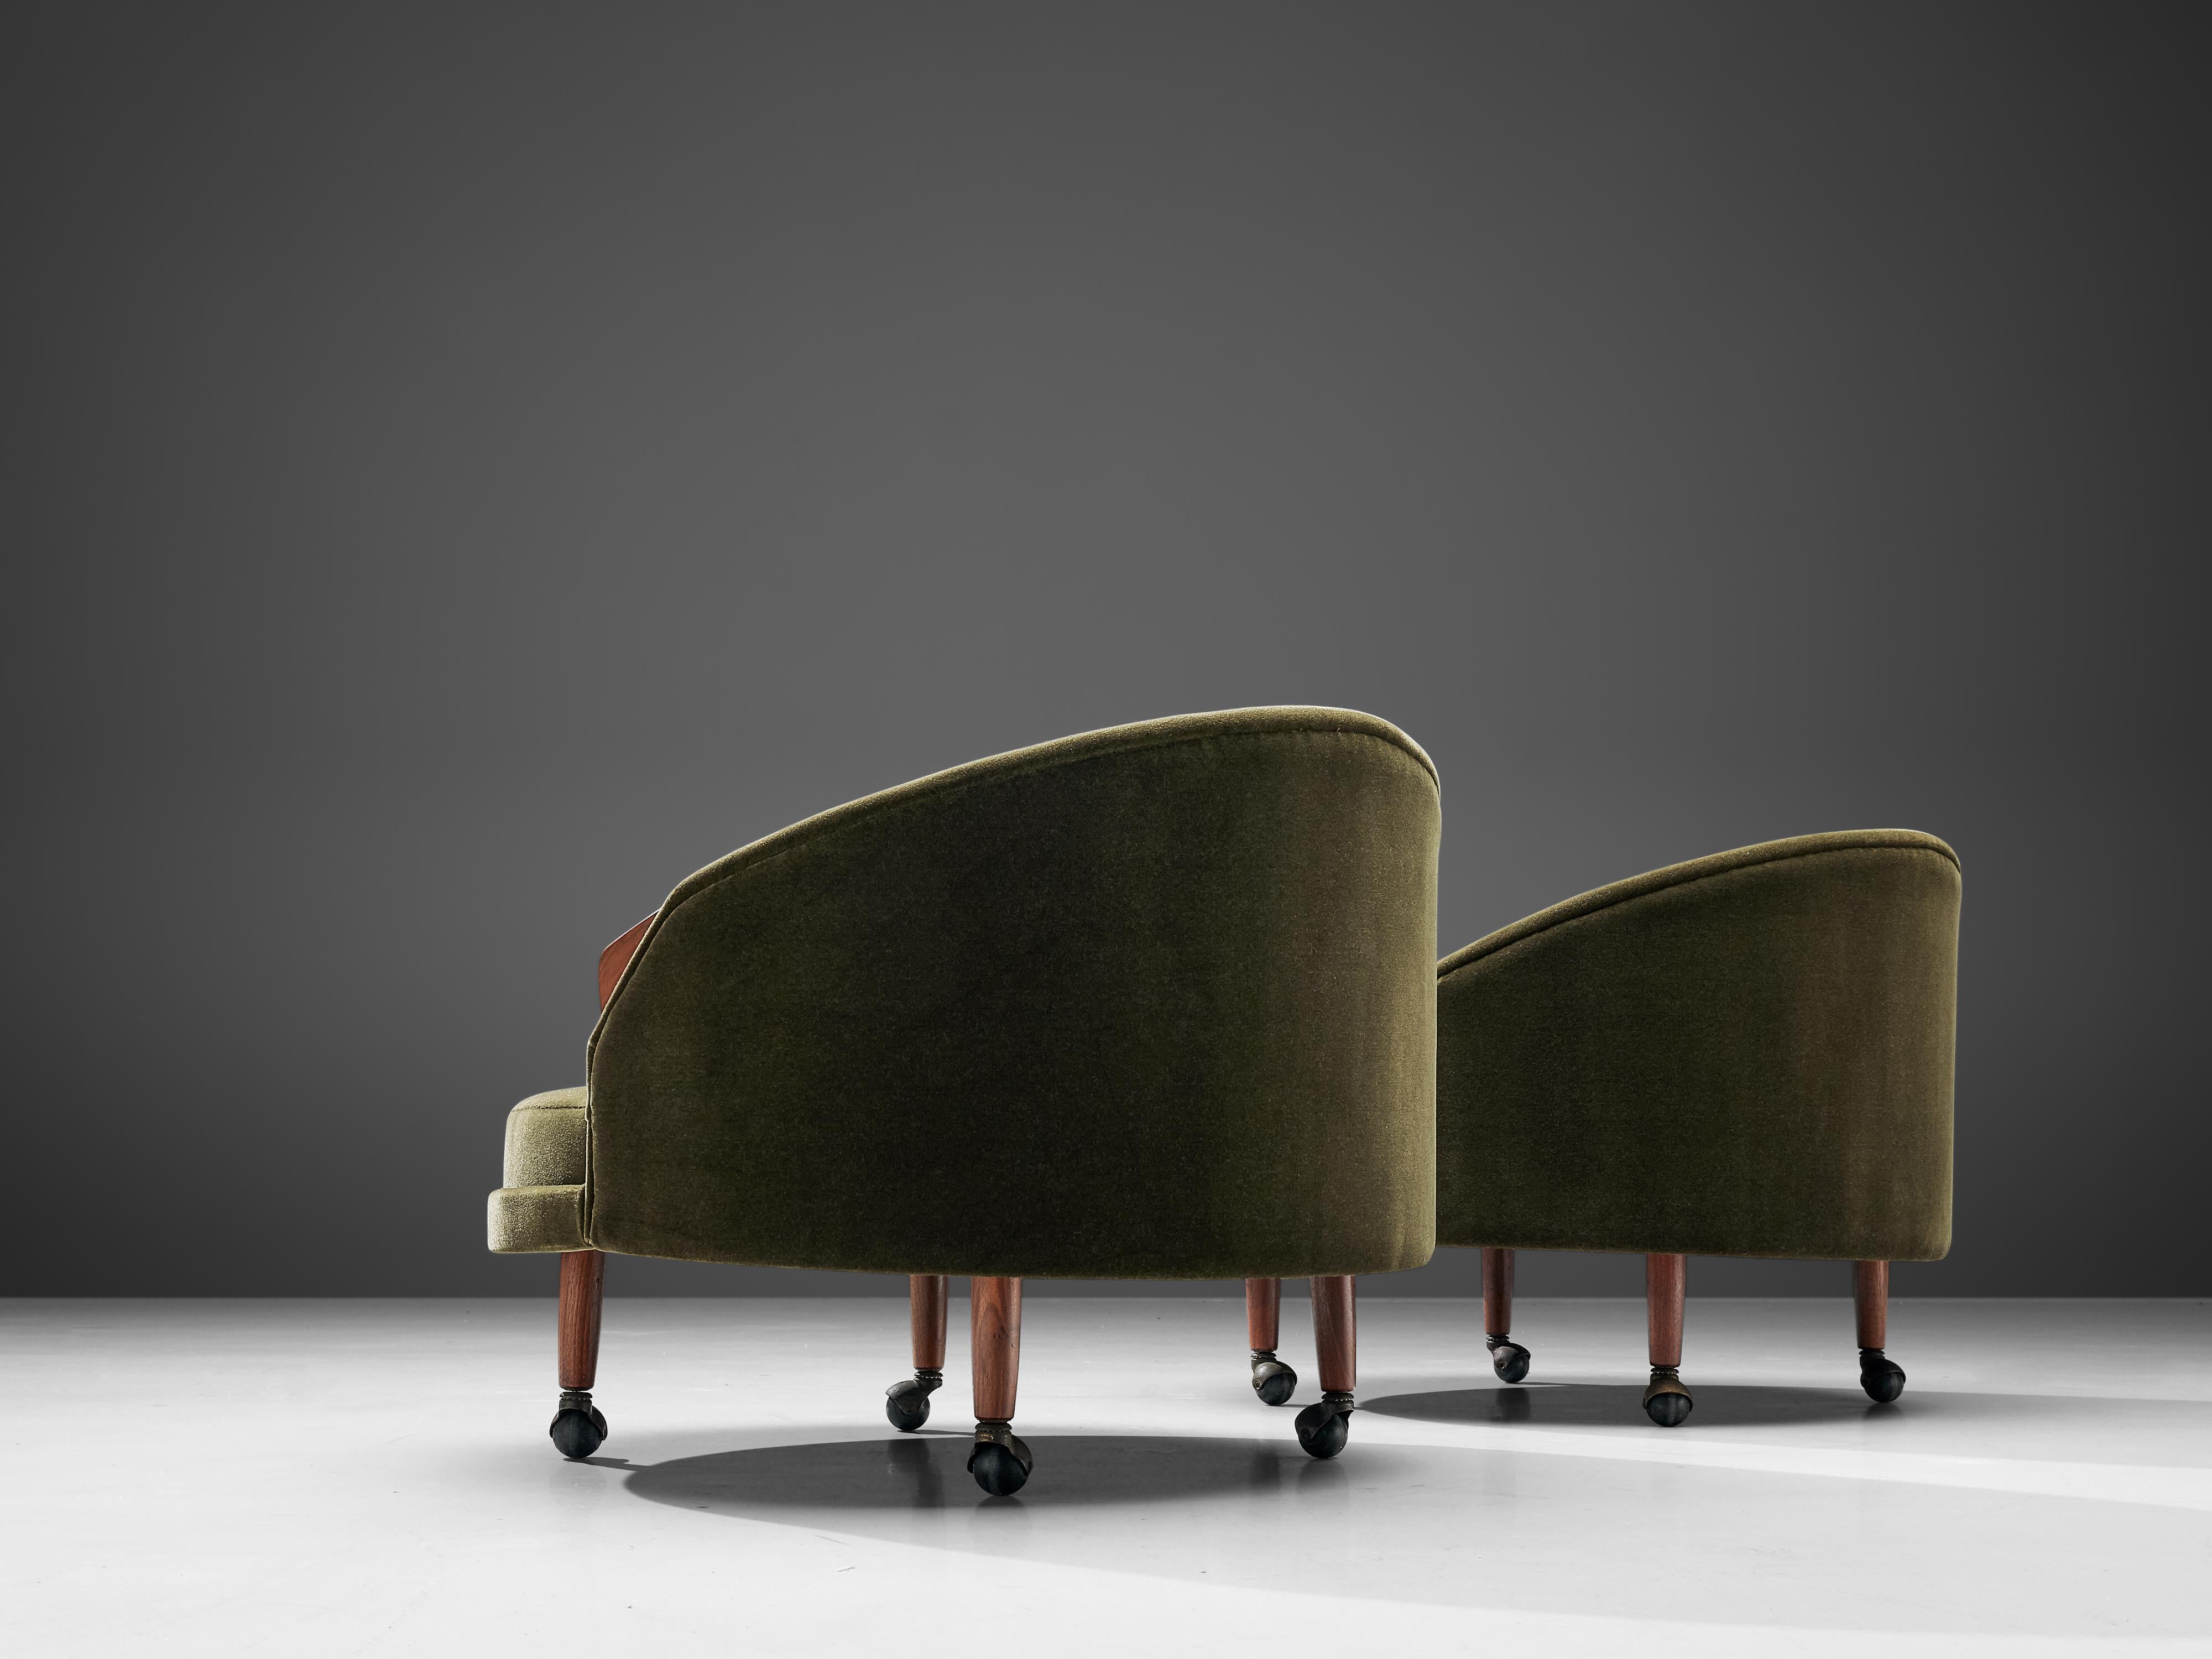 Mid-20th Century Adrian Pearsall Pair of 'Havana' Lounge Chairs in Green Pierre Frey and Walnut